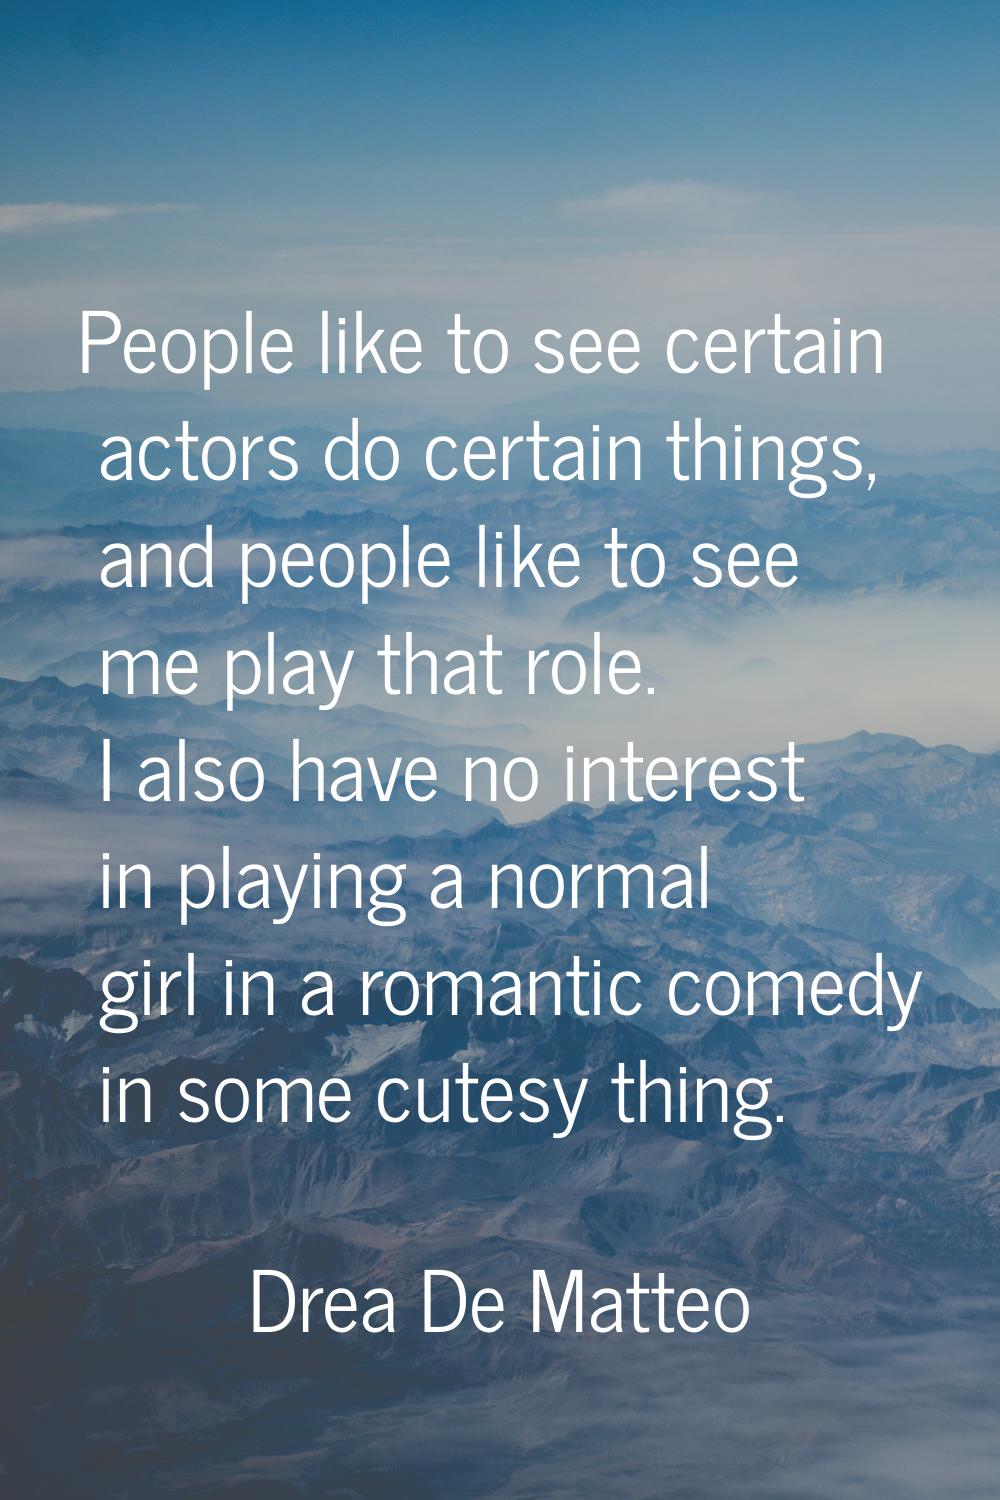 People like to see certain actors do certain things, and people like to see me play that role. I al